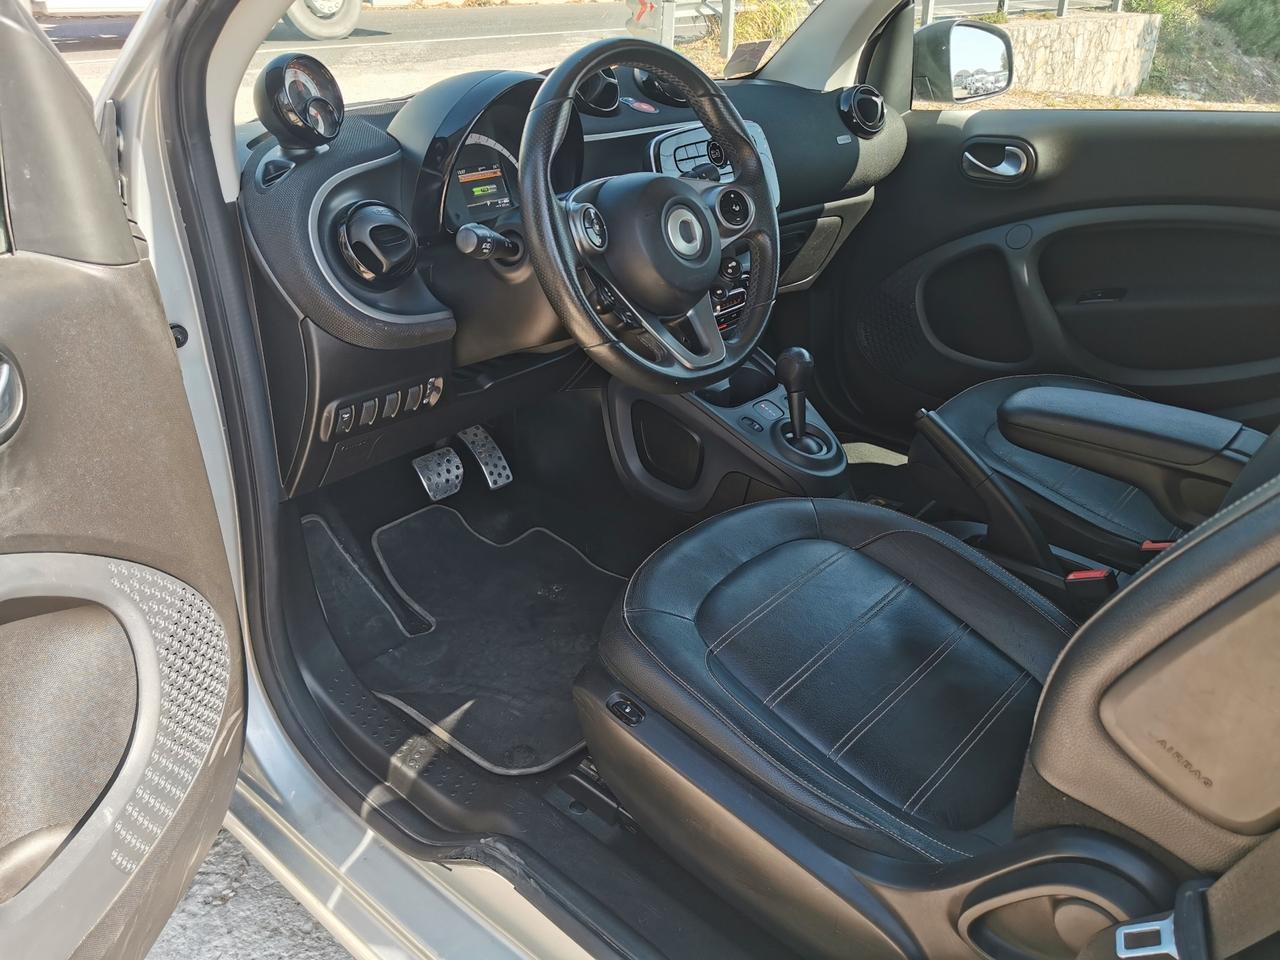 Smart ForTwo electric drive Youngster